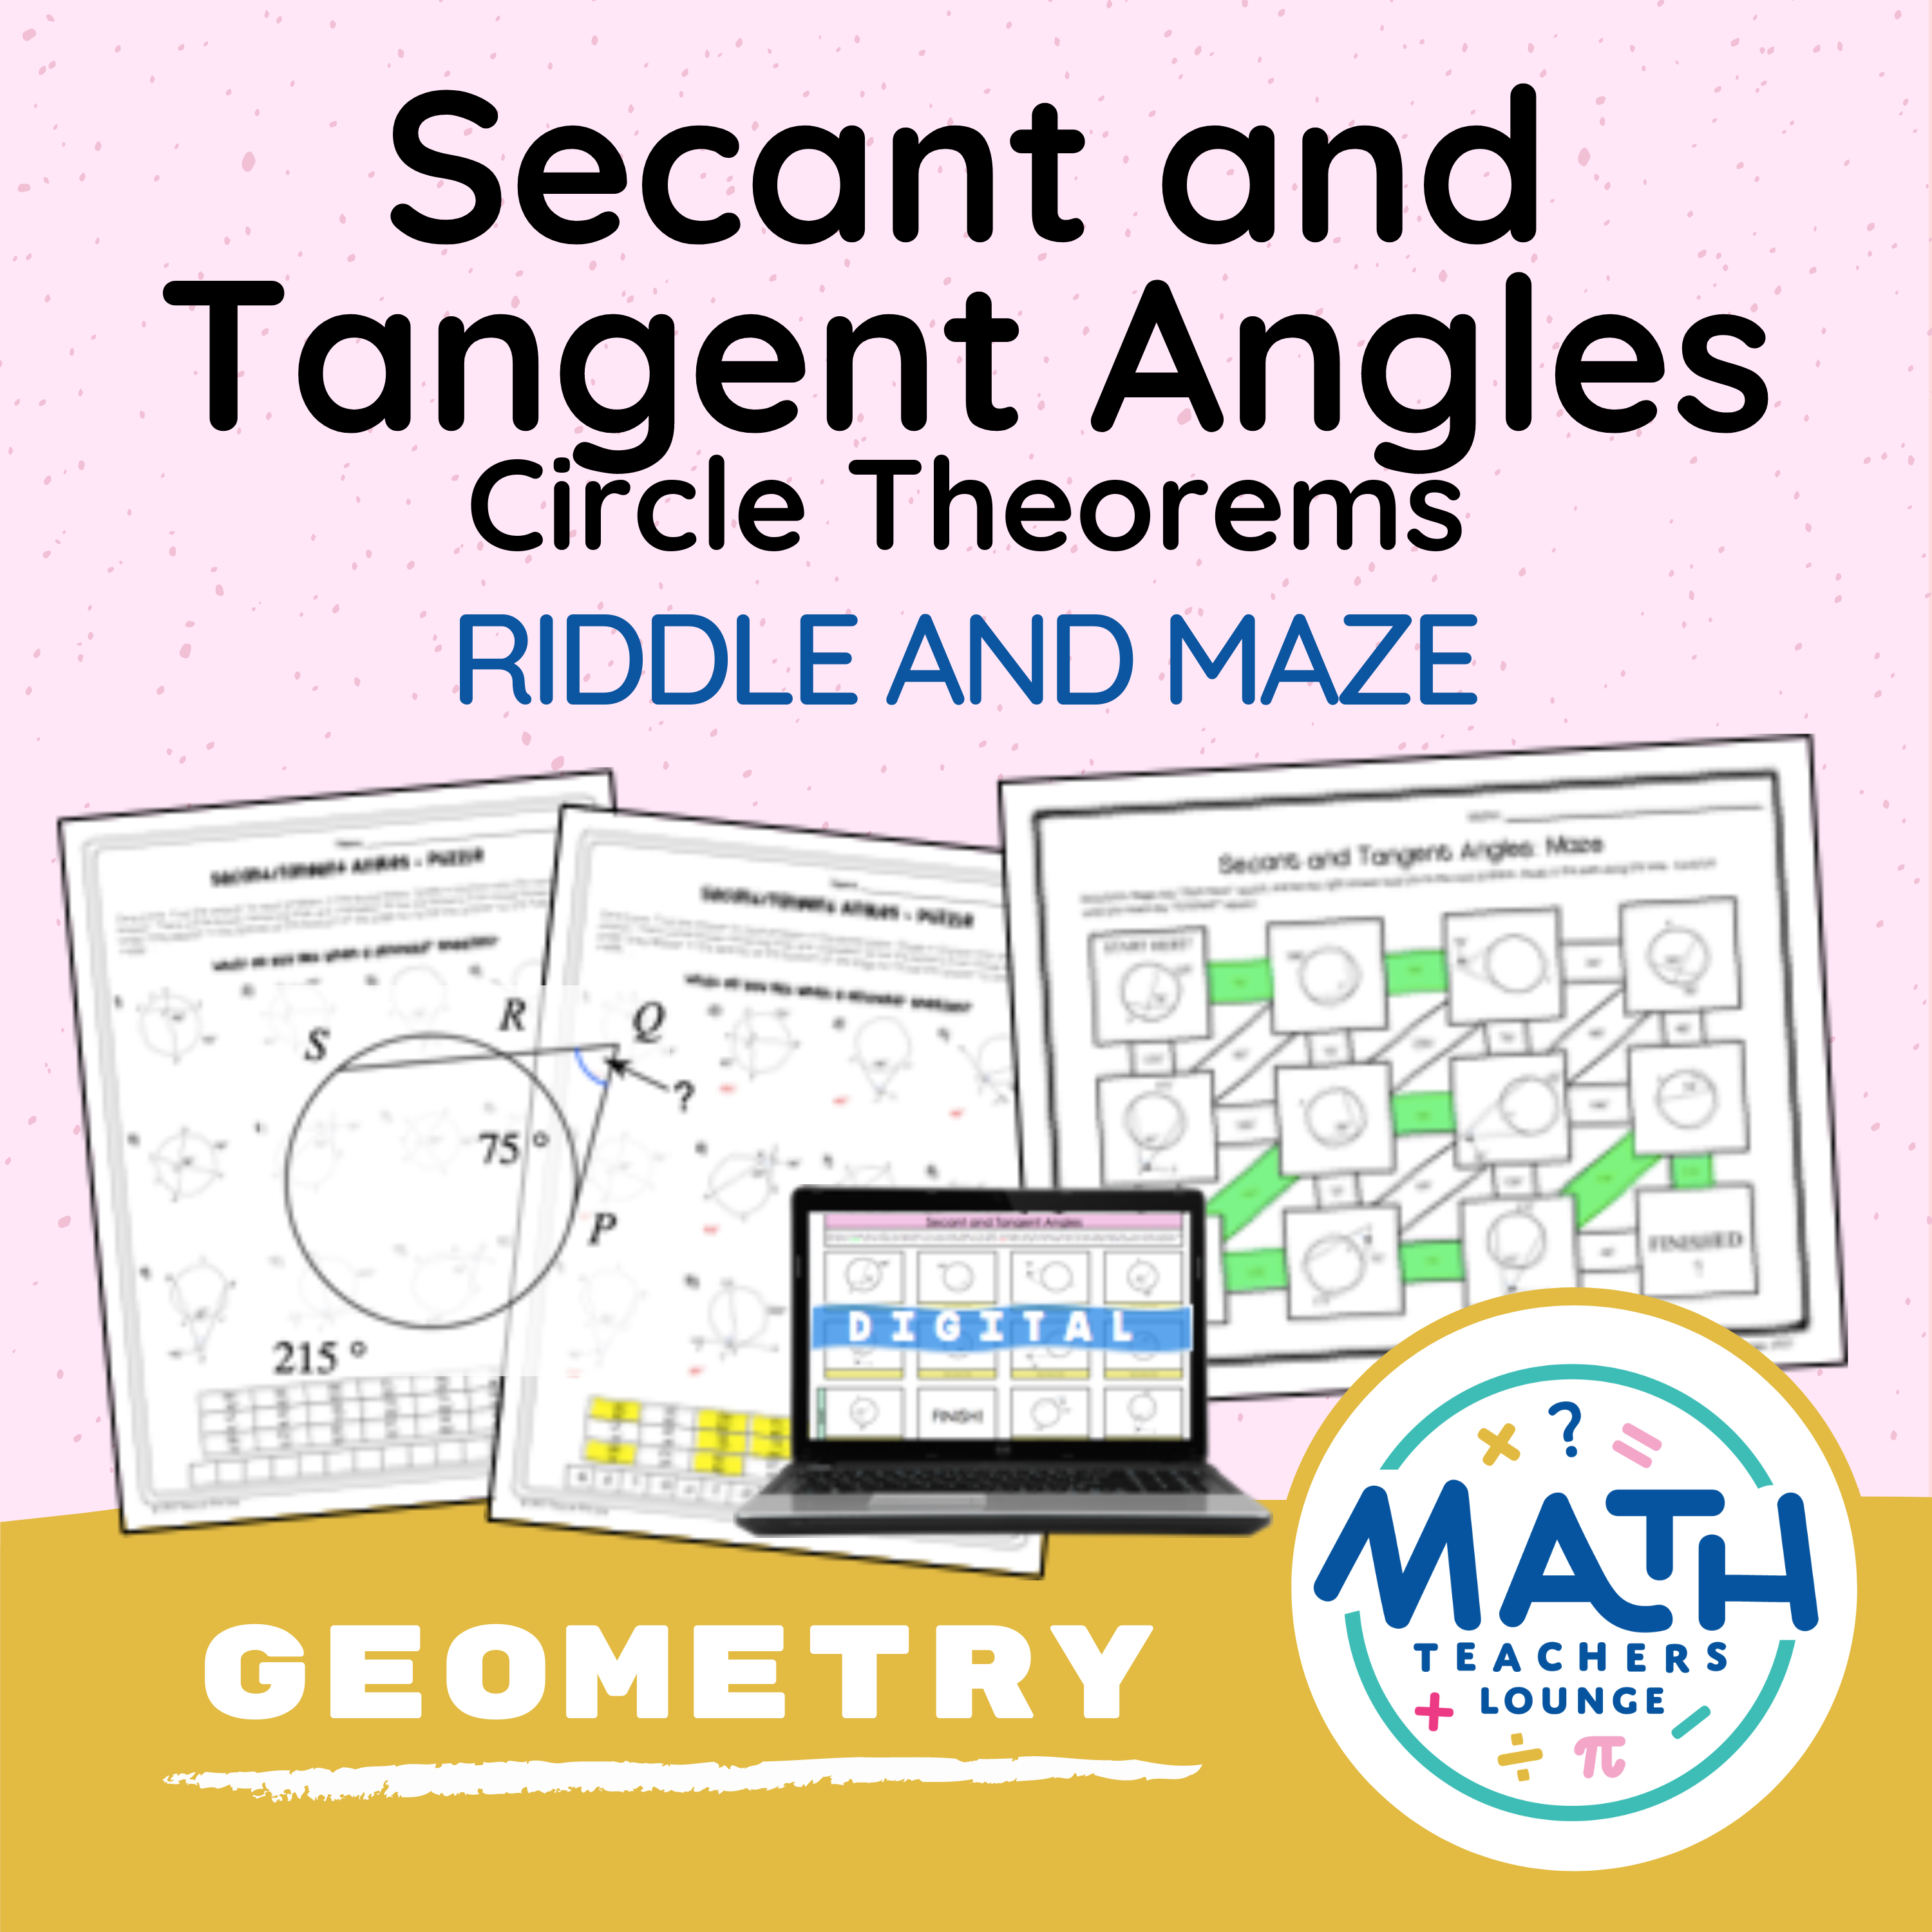 Geometry Circle Theorems: Secant and Tangent Angles - Riddle and Maze's featured image